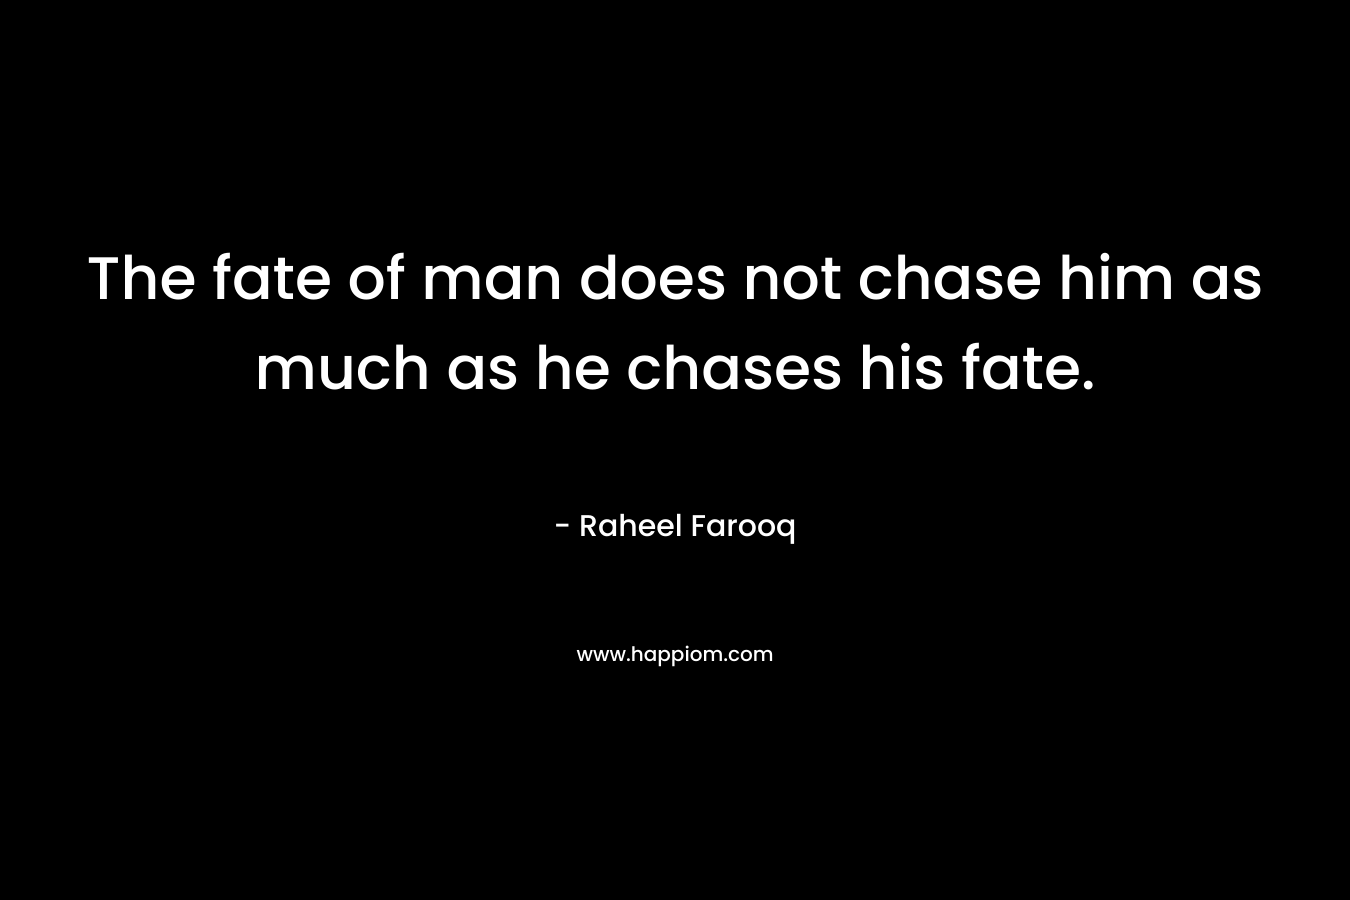 The fate of man does not chase him as much as he chases his fate.